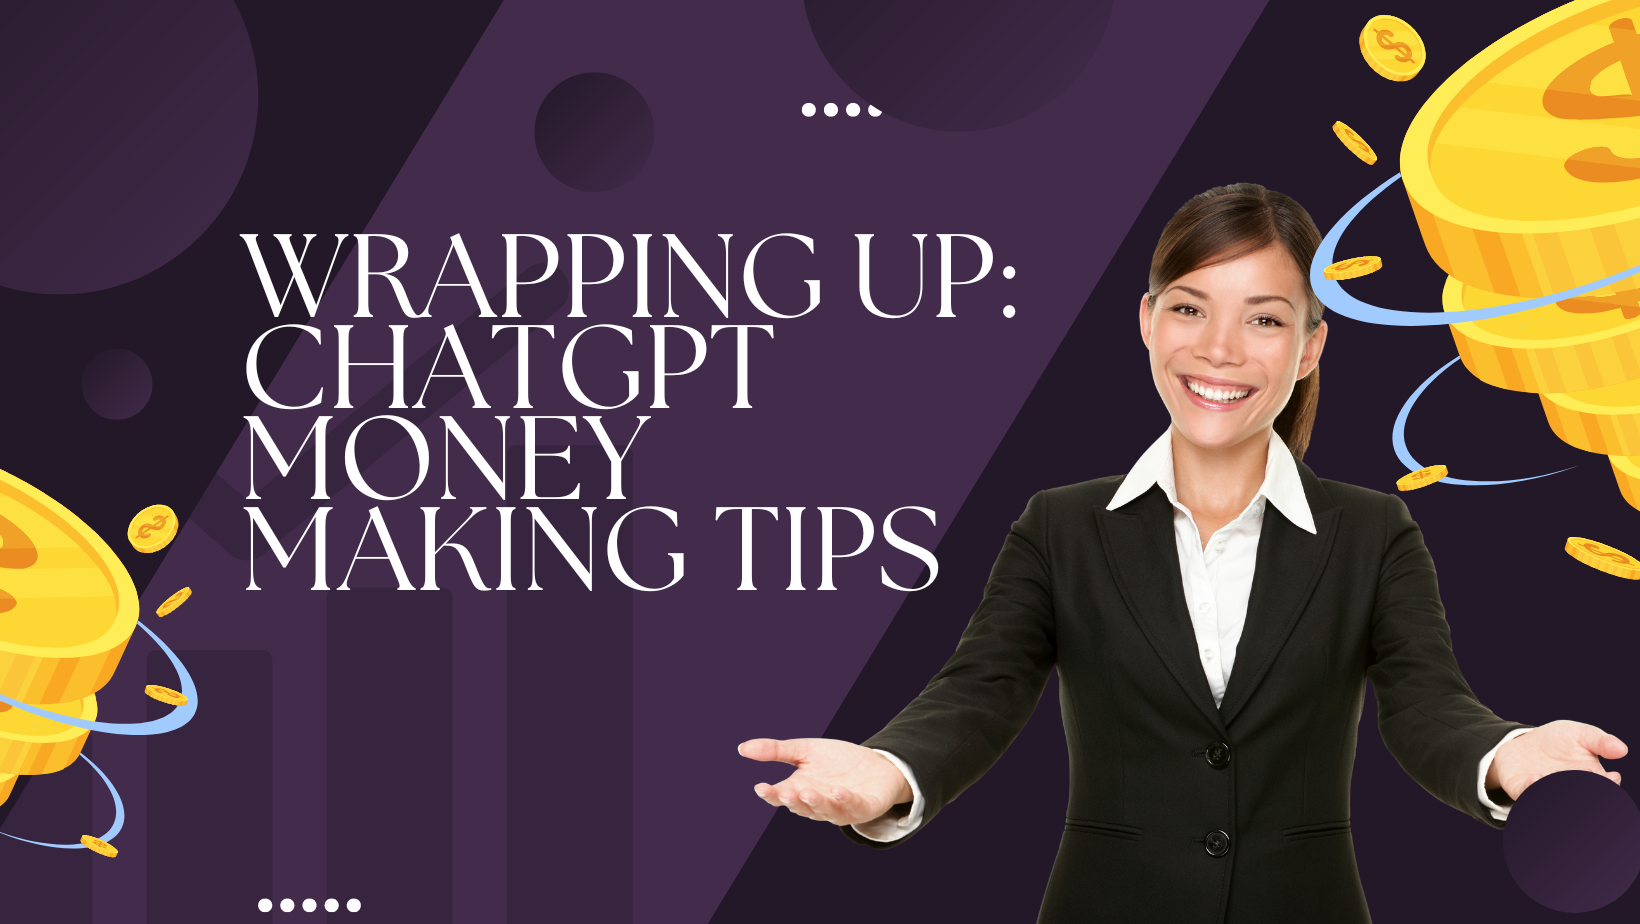 WRAPPING UP CHATGPT MONEY MAKING TIPS